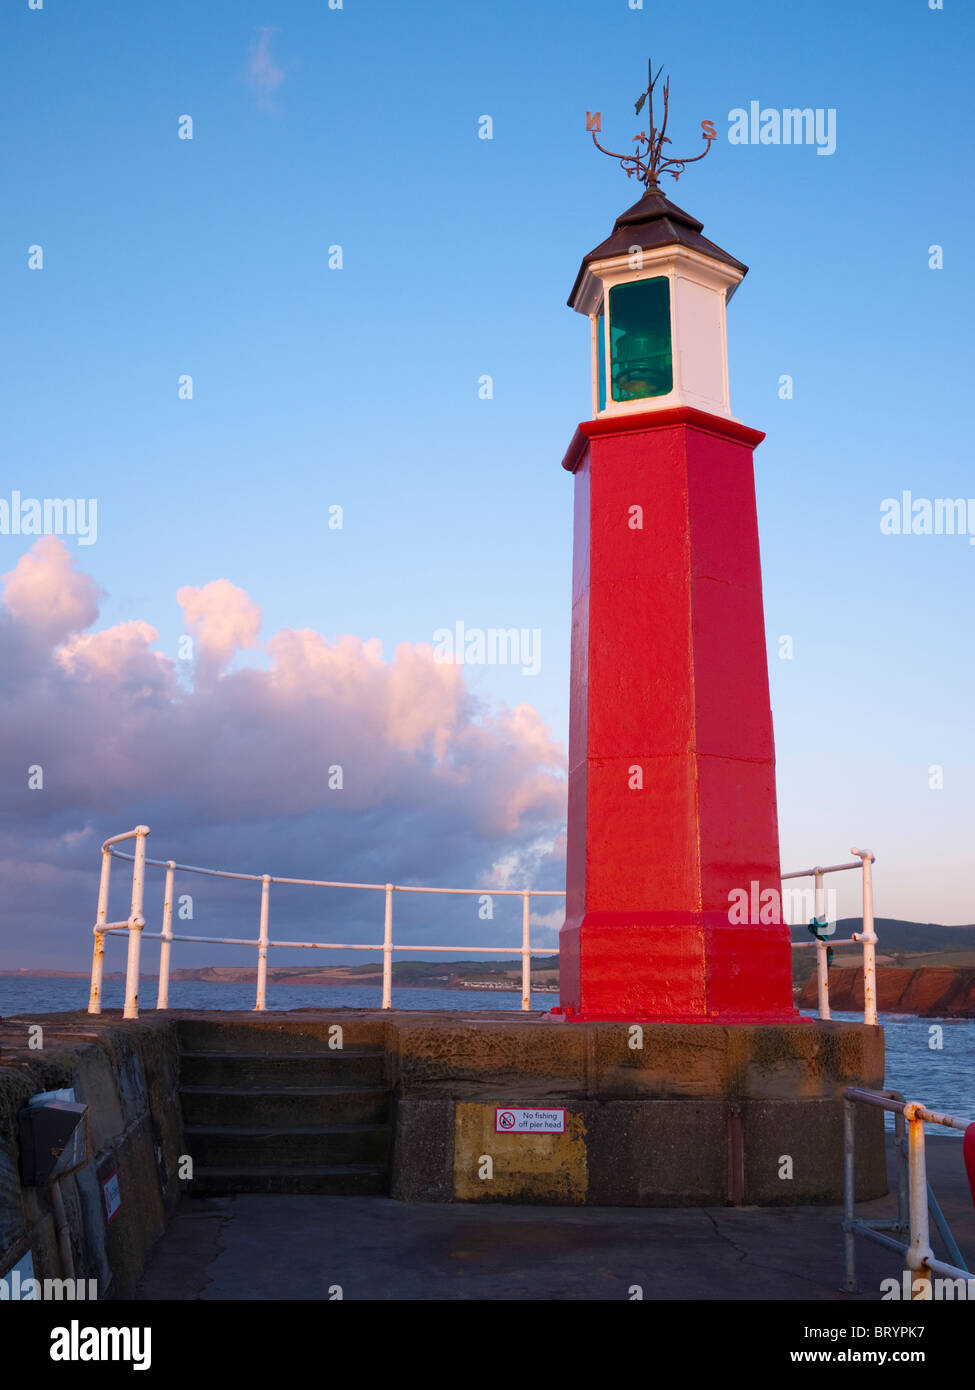 Watchet Harbour Marina Lighthouse, Somerset, Angleterre. Banque D'Images